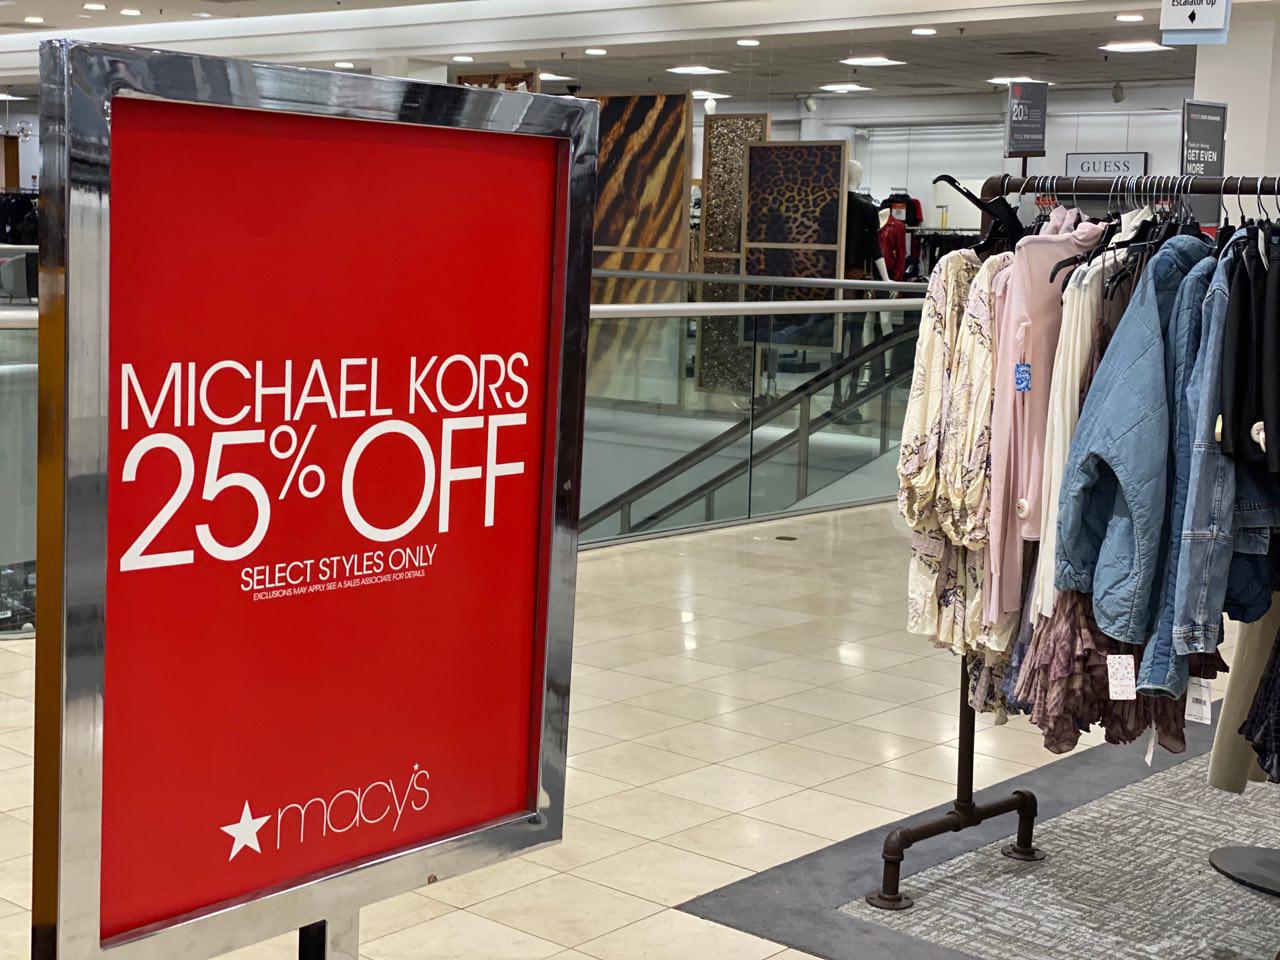 You can also buy shoes, bags and clothing from Michael Kors at Macy’s